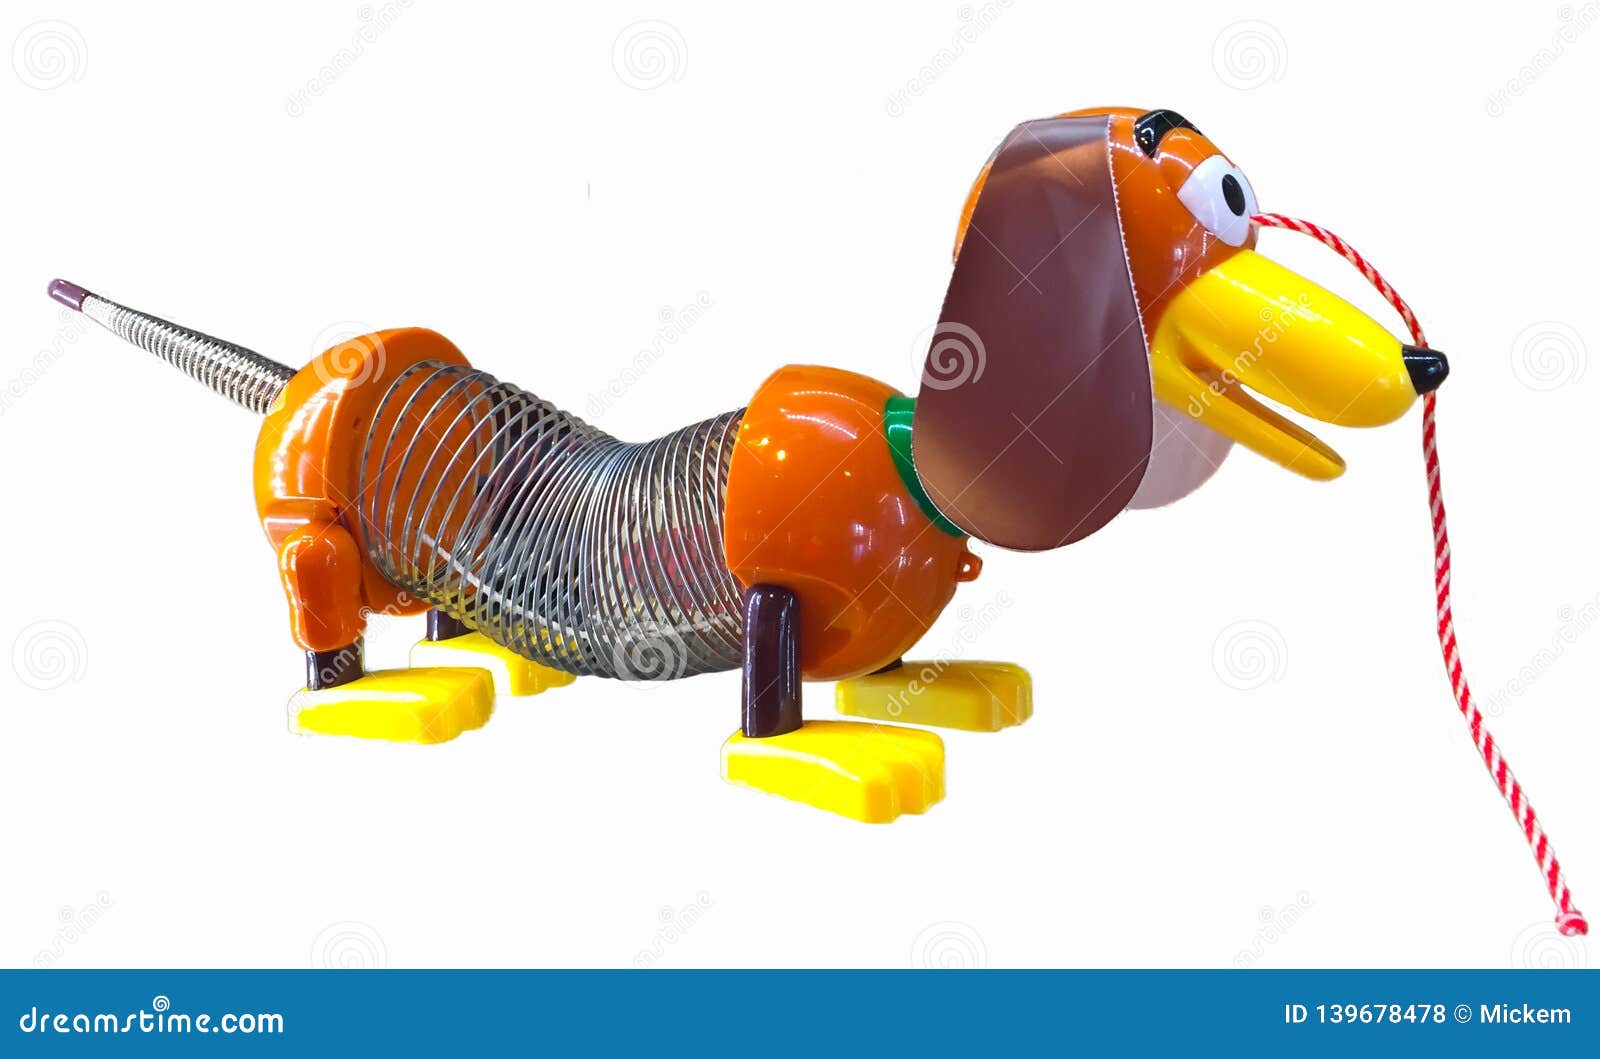 Disney Pixar Toy Story Slinky Toy Dog White Background Editorial Stock  Photo - Image of cartoon, characters: 139678478